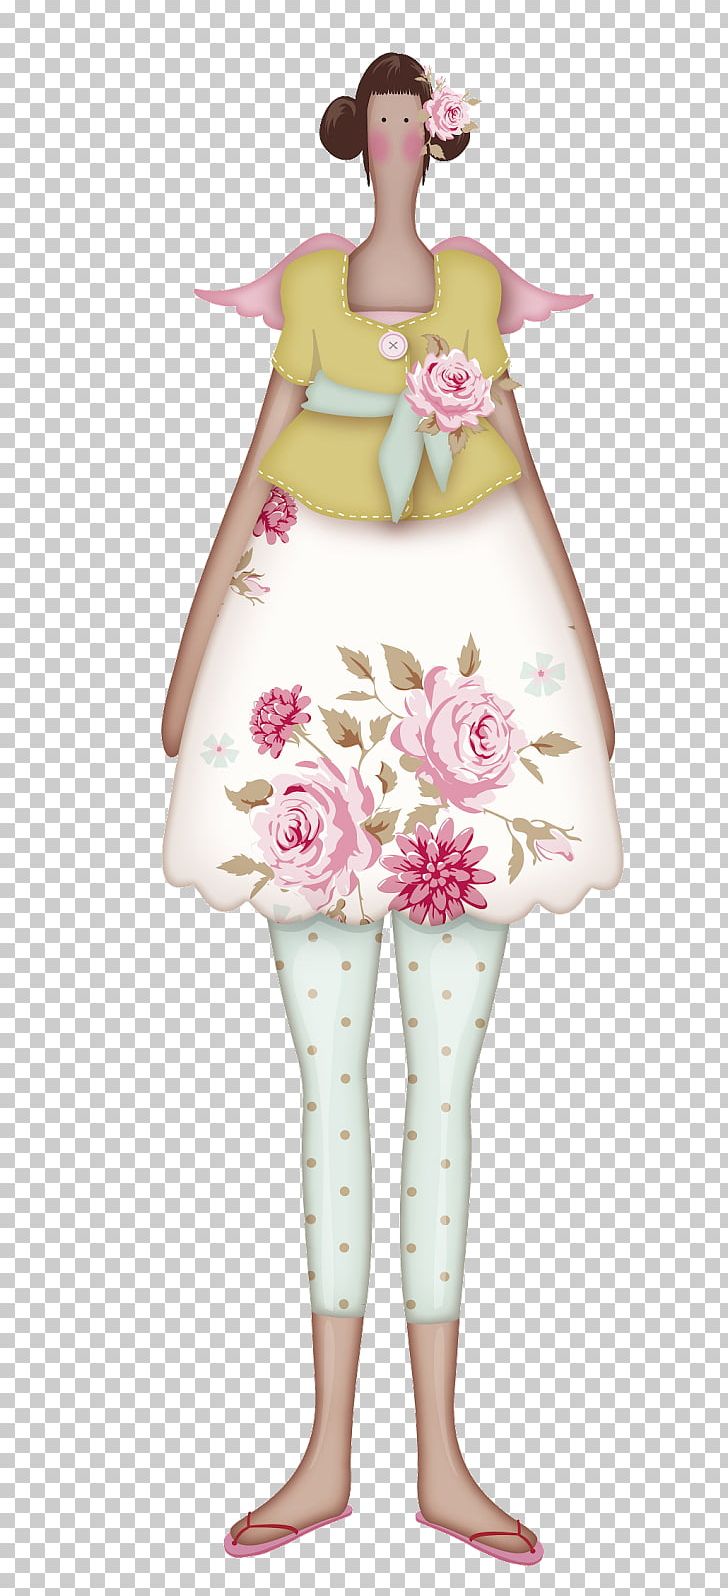 Doll Child Costume Design PNG, Clipart, Aside, Character, Child, Costume, Costume Design Free PNG Download